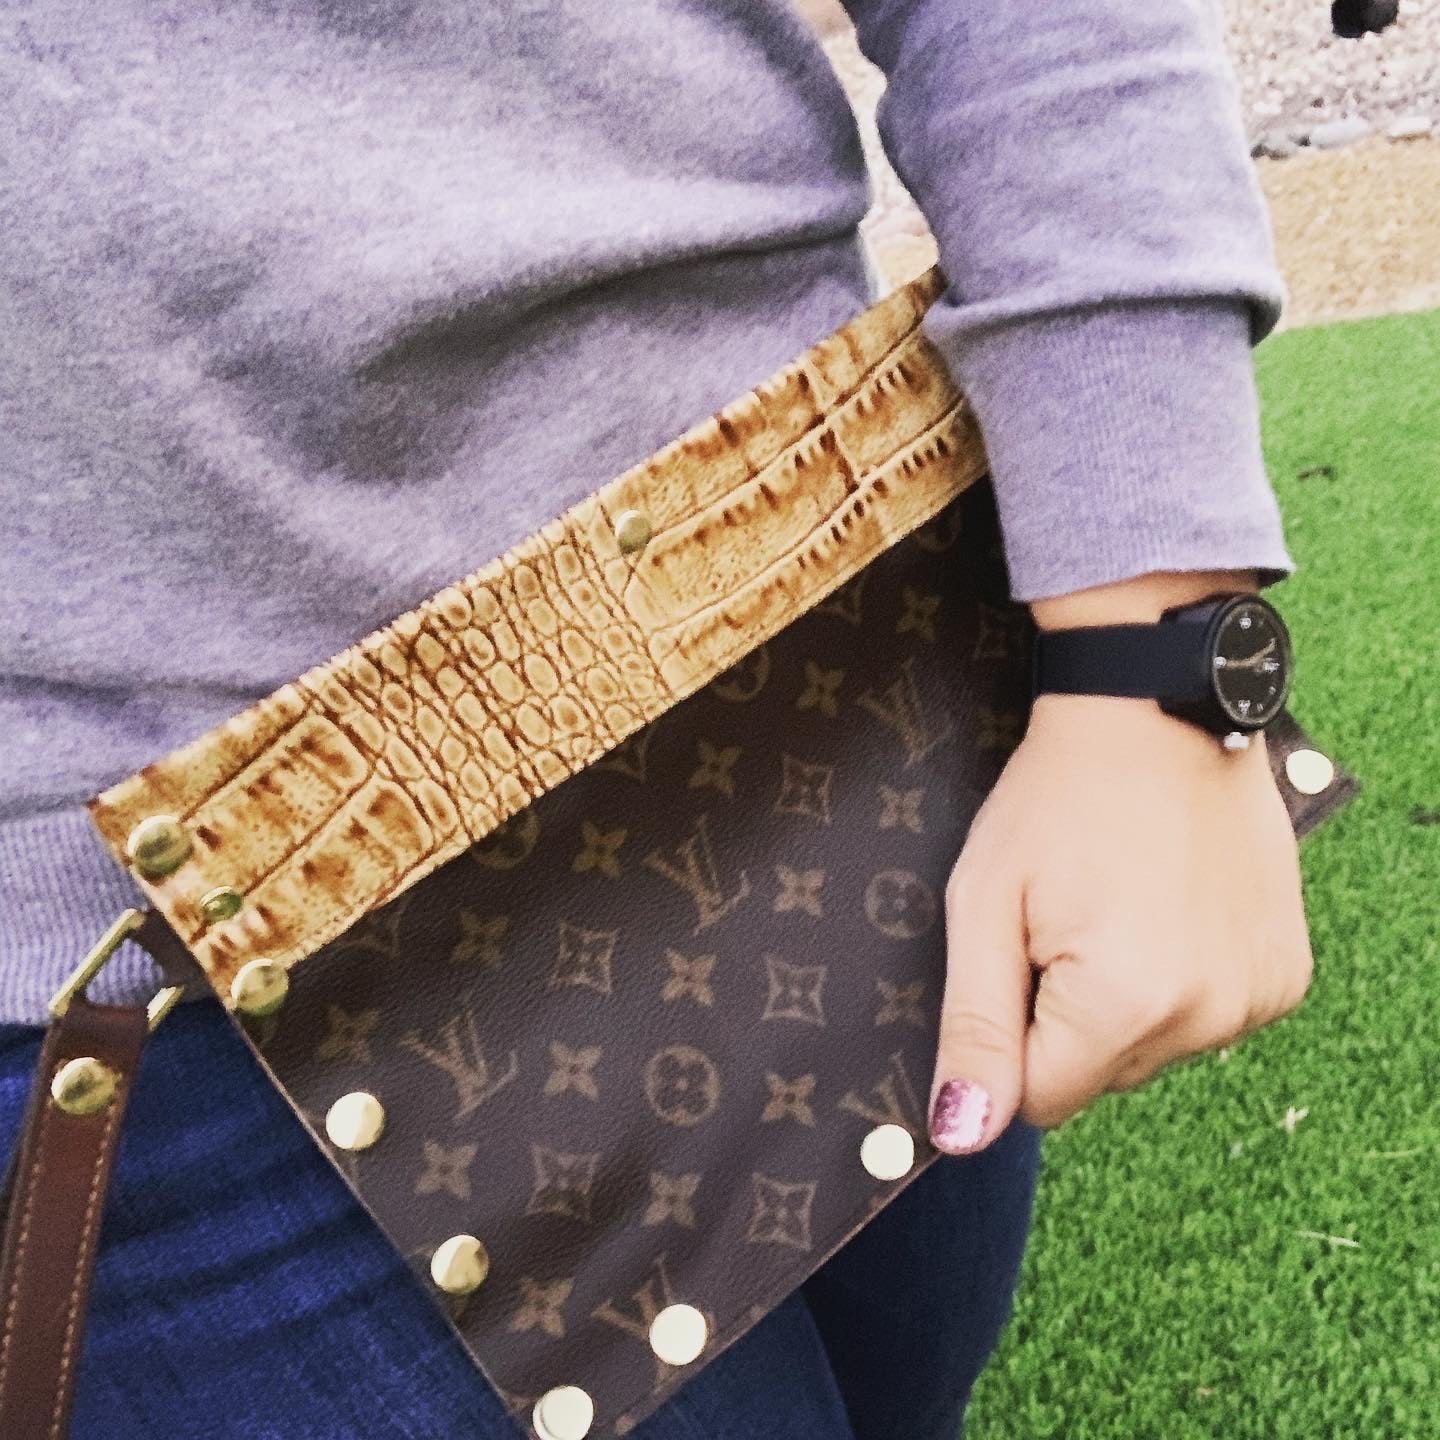 Authentic Upcycled Louis Vuitton Leather Clutch